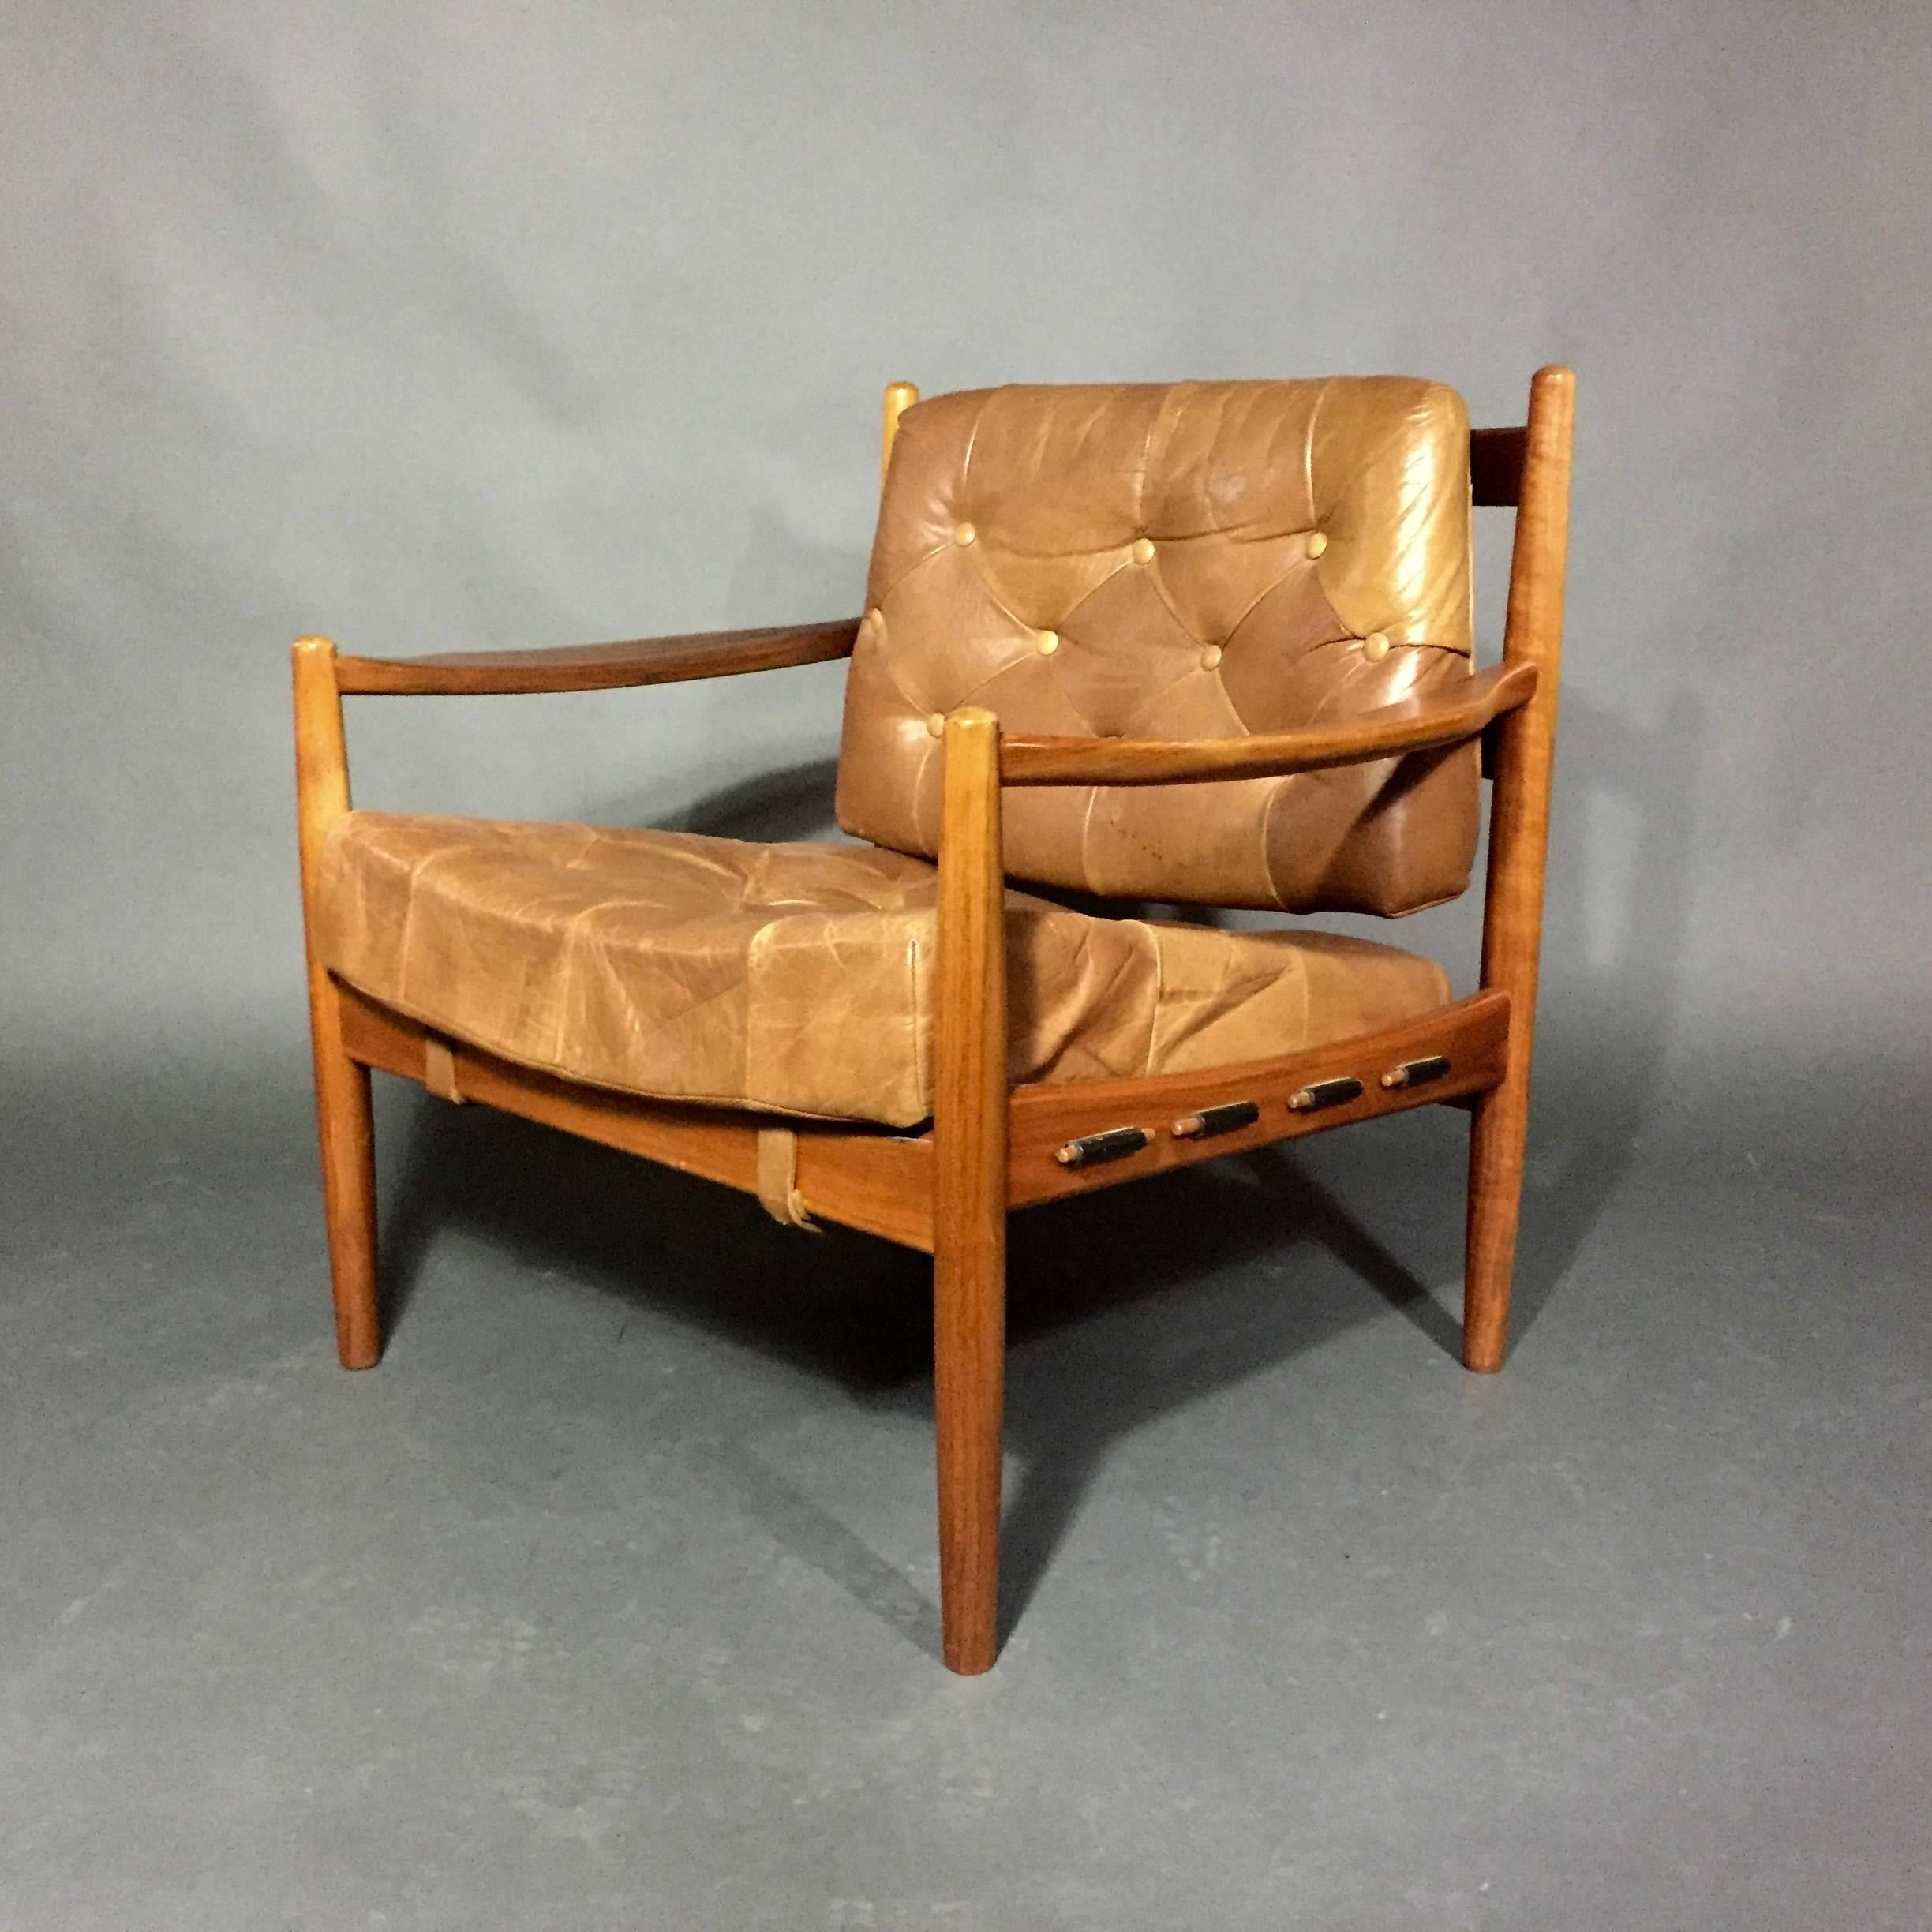 One of our favourite Thillmark chair designs. Beautiful patchwork and button tufted cognac buffalo leather over solid beech wood frame with sculpted arms. Seat is supported by black leather straps underneath that are secured with wood toggles on two